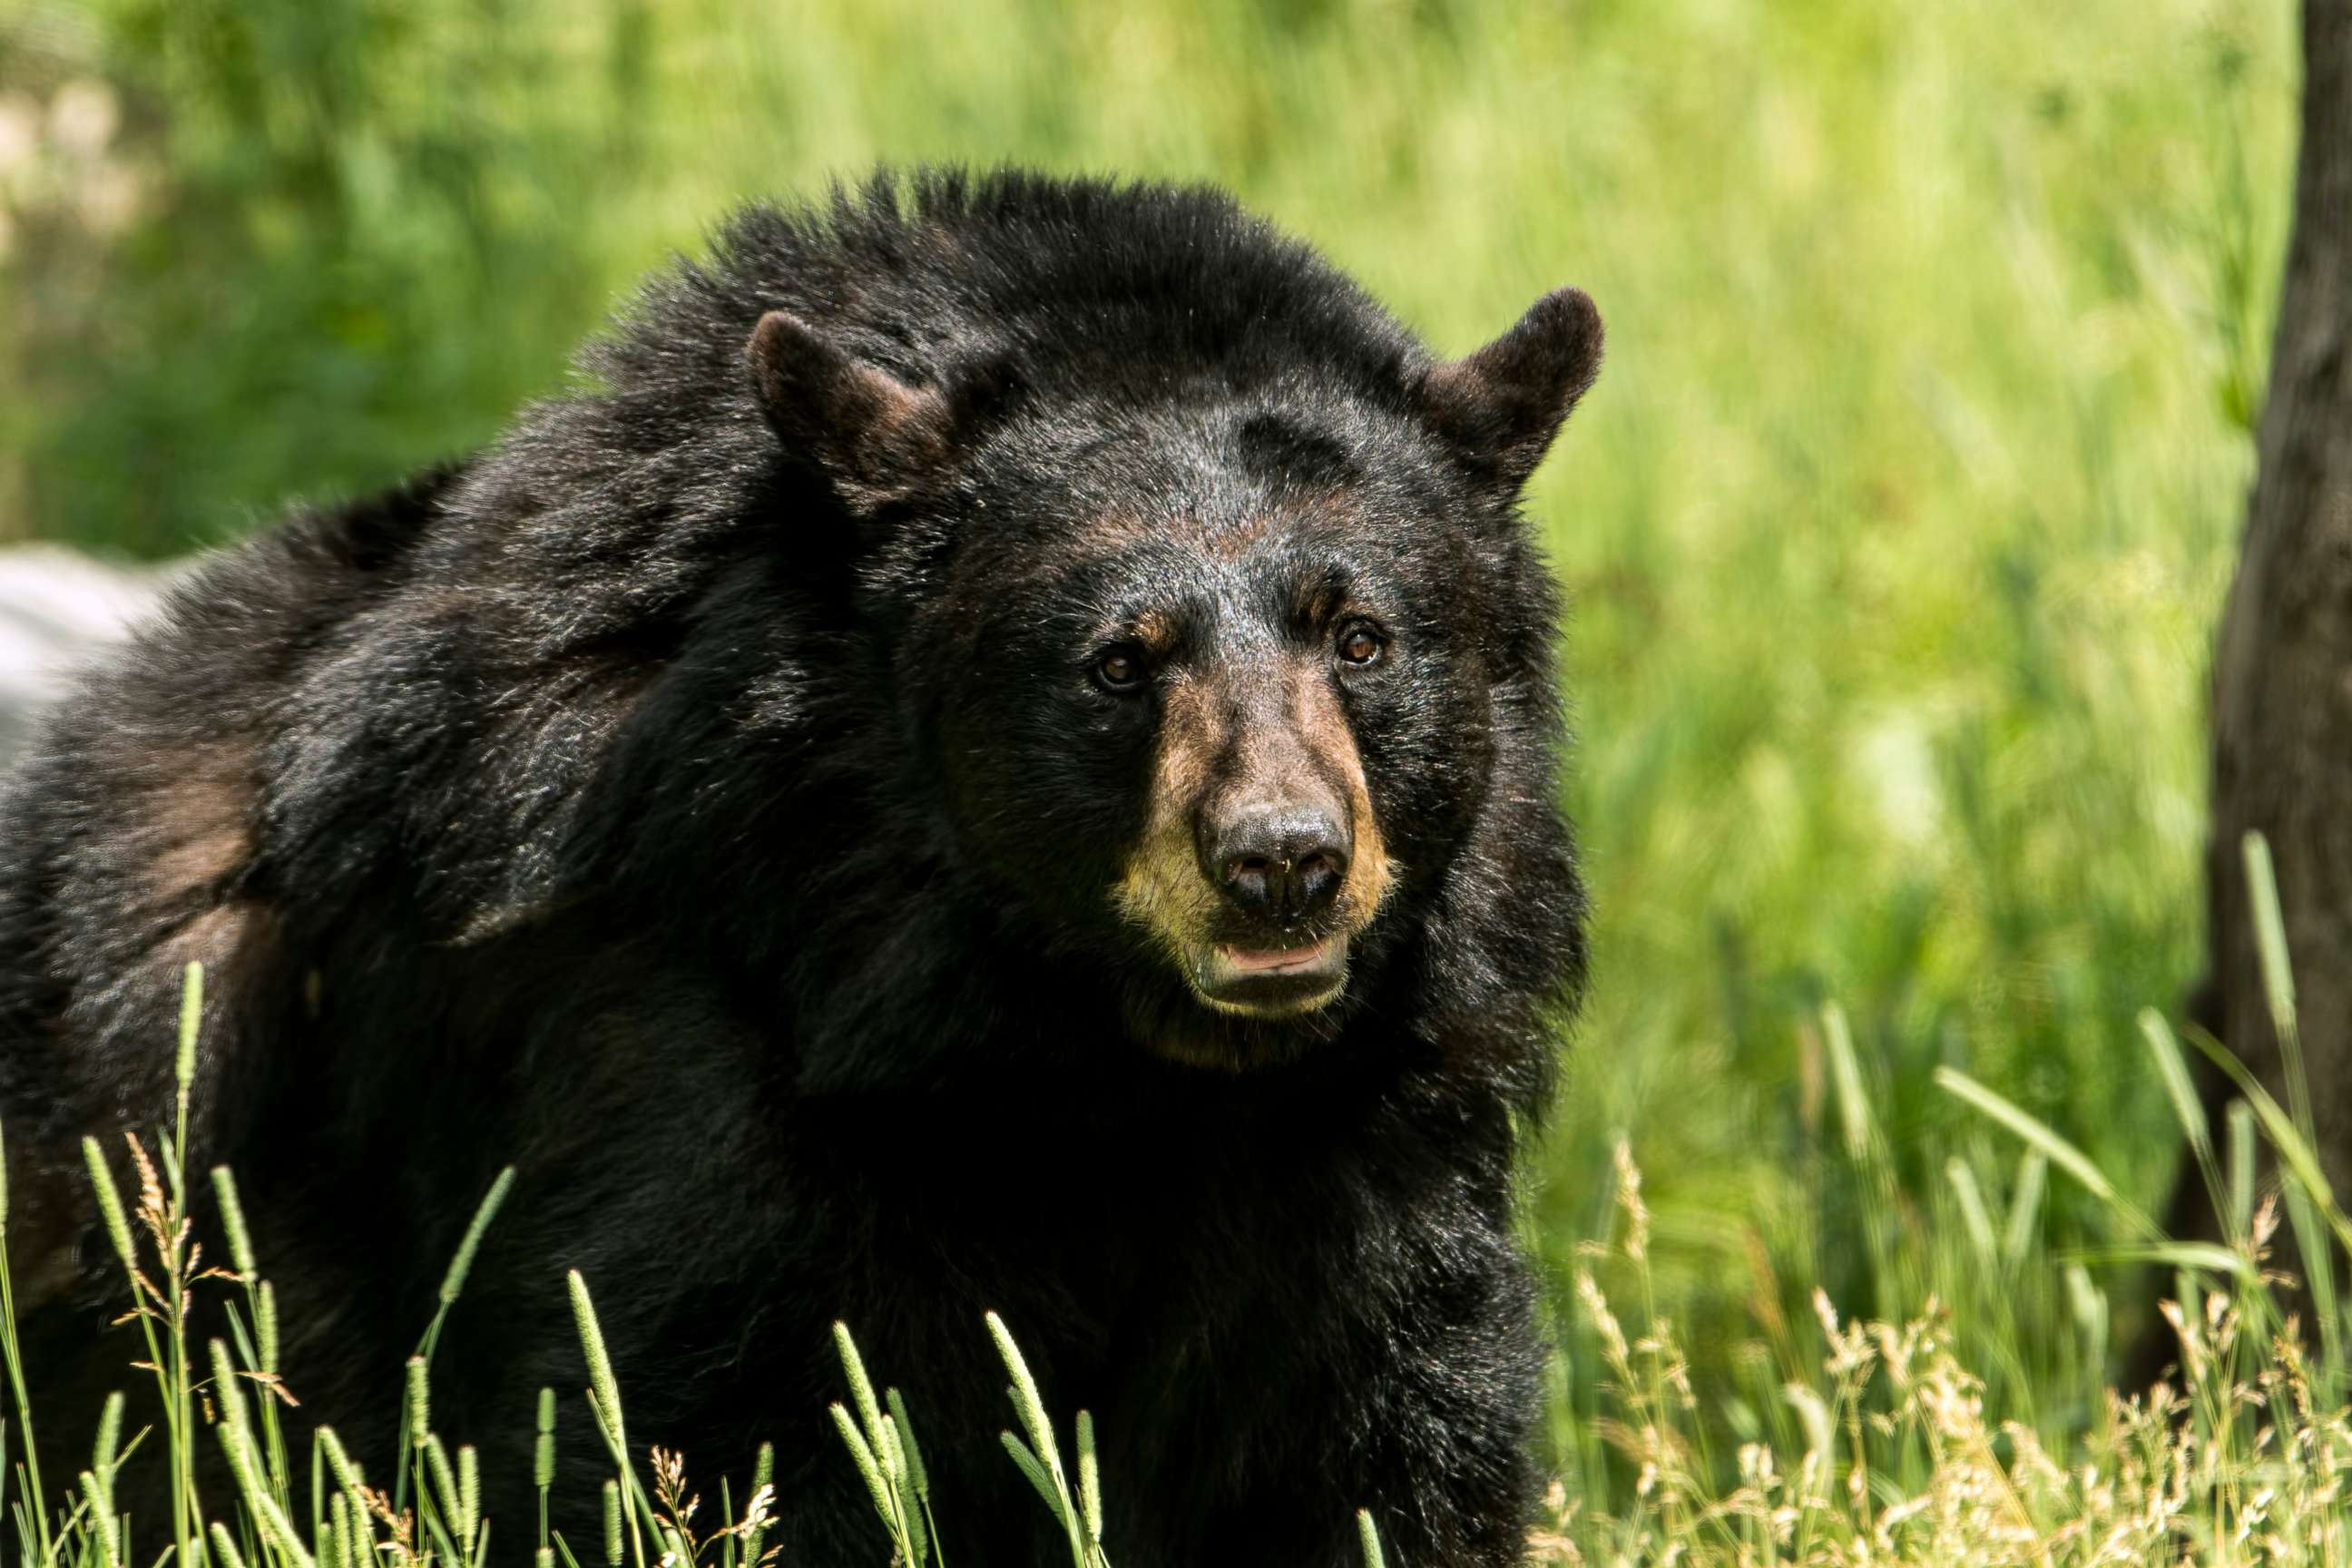 Black bear attacks on humans are rare but often begin as scuffles